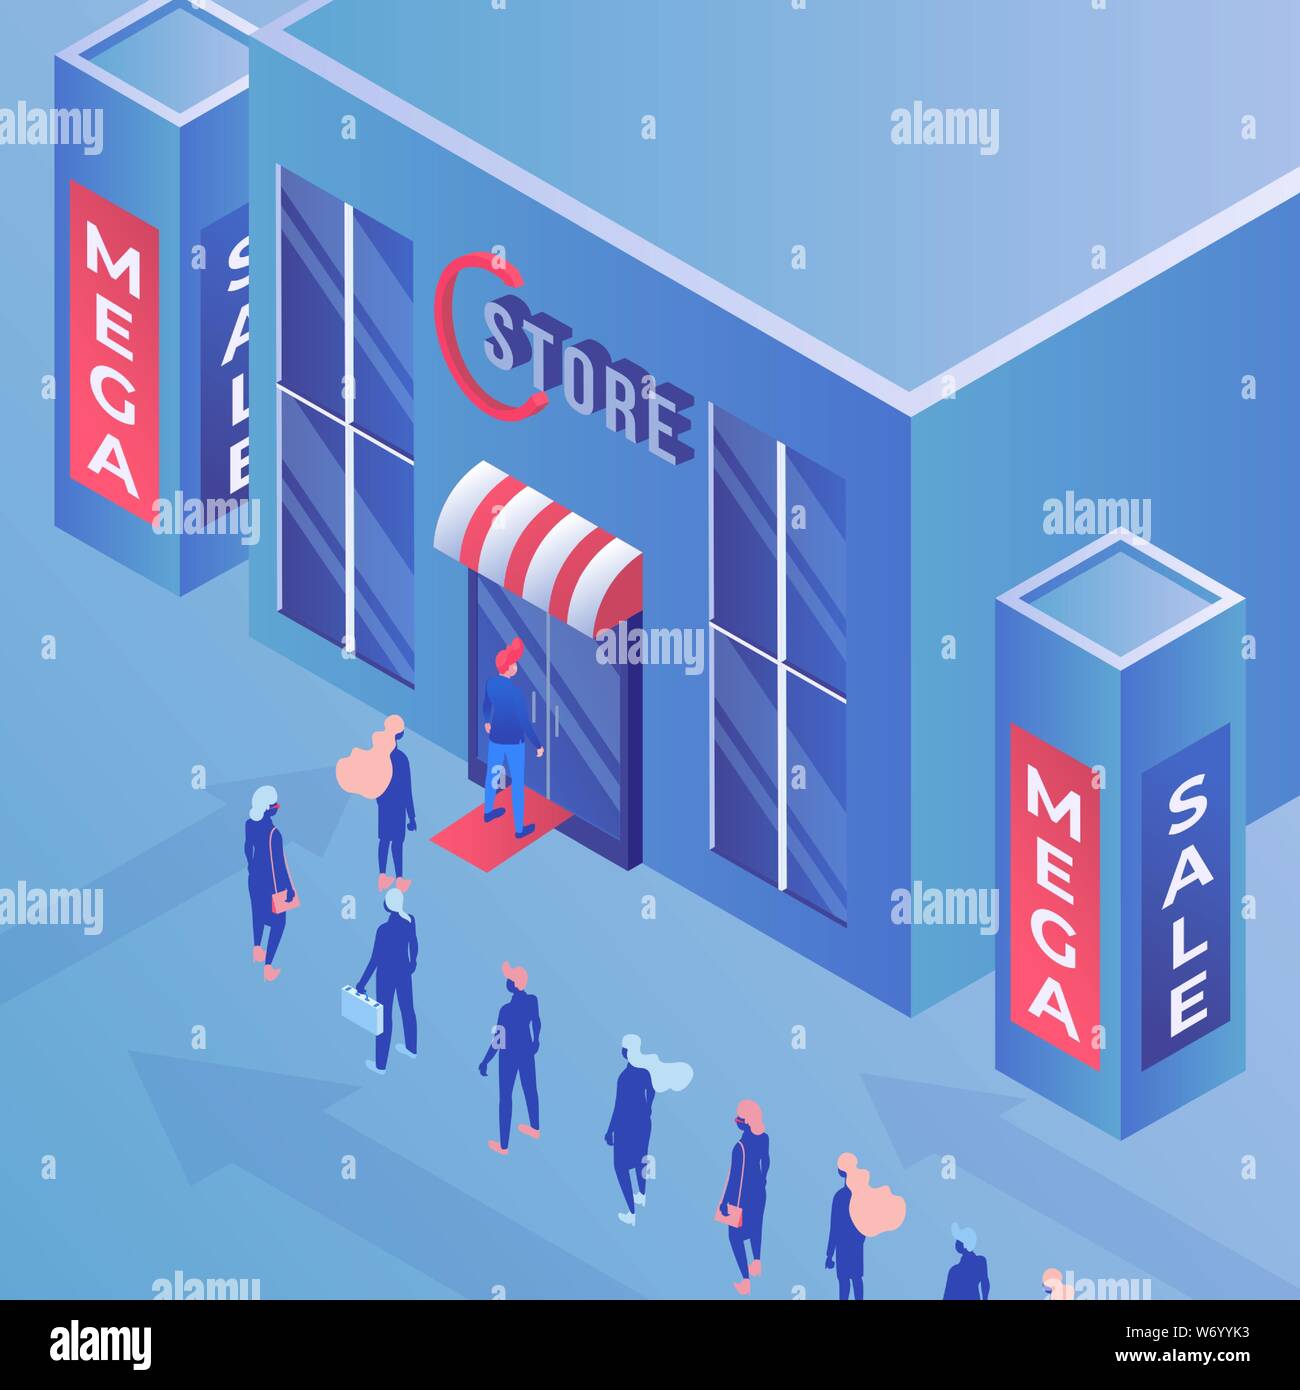 Store mega sale isometric vector illustration. Consumerism, shopping, advertisement and marketing, promo campaign drawing. Buyers in queue, shop discounts and special offers for clients Stock Vector